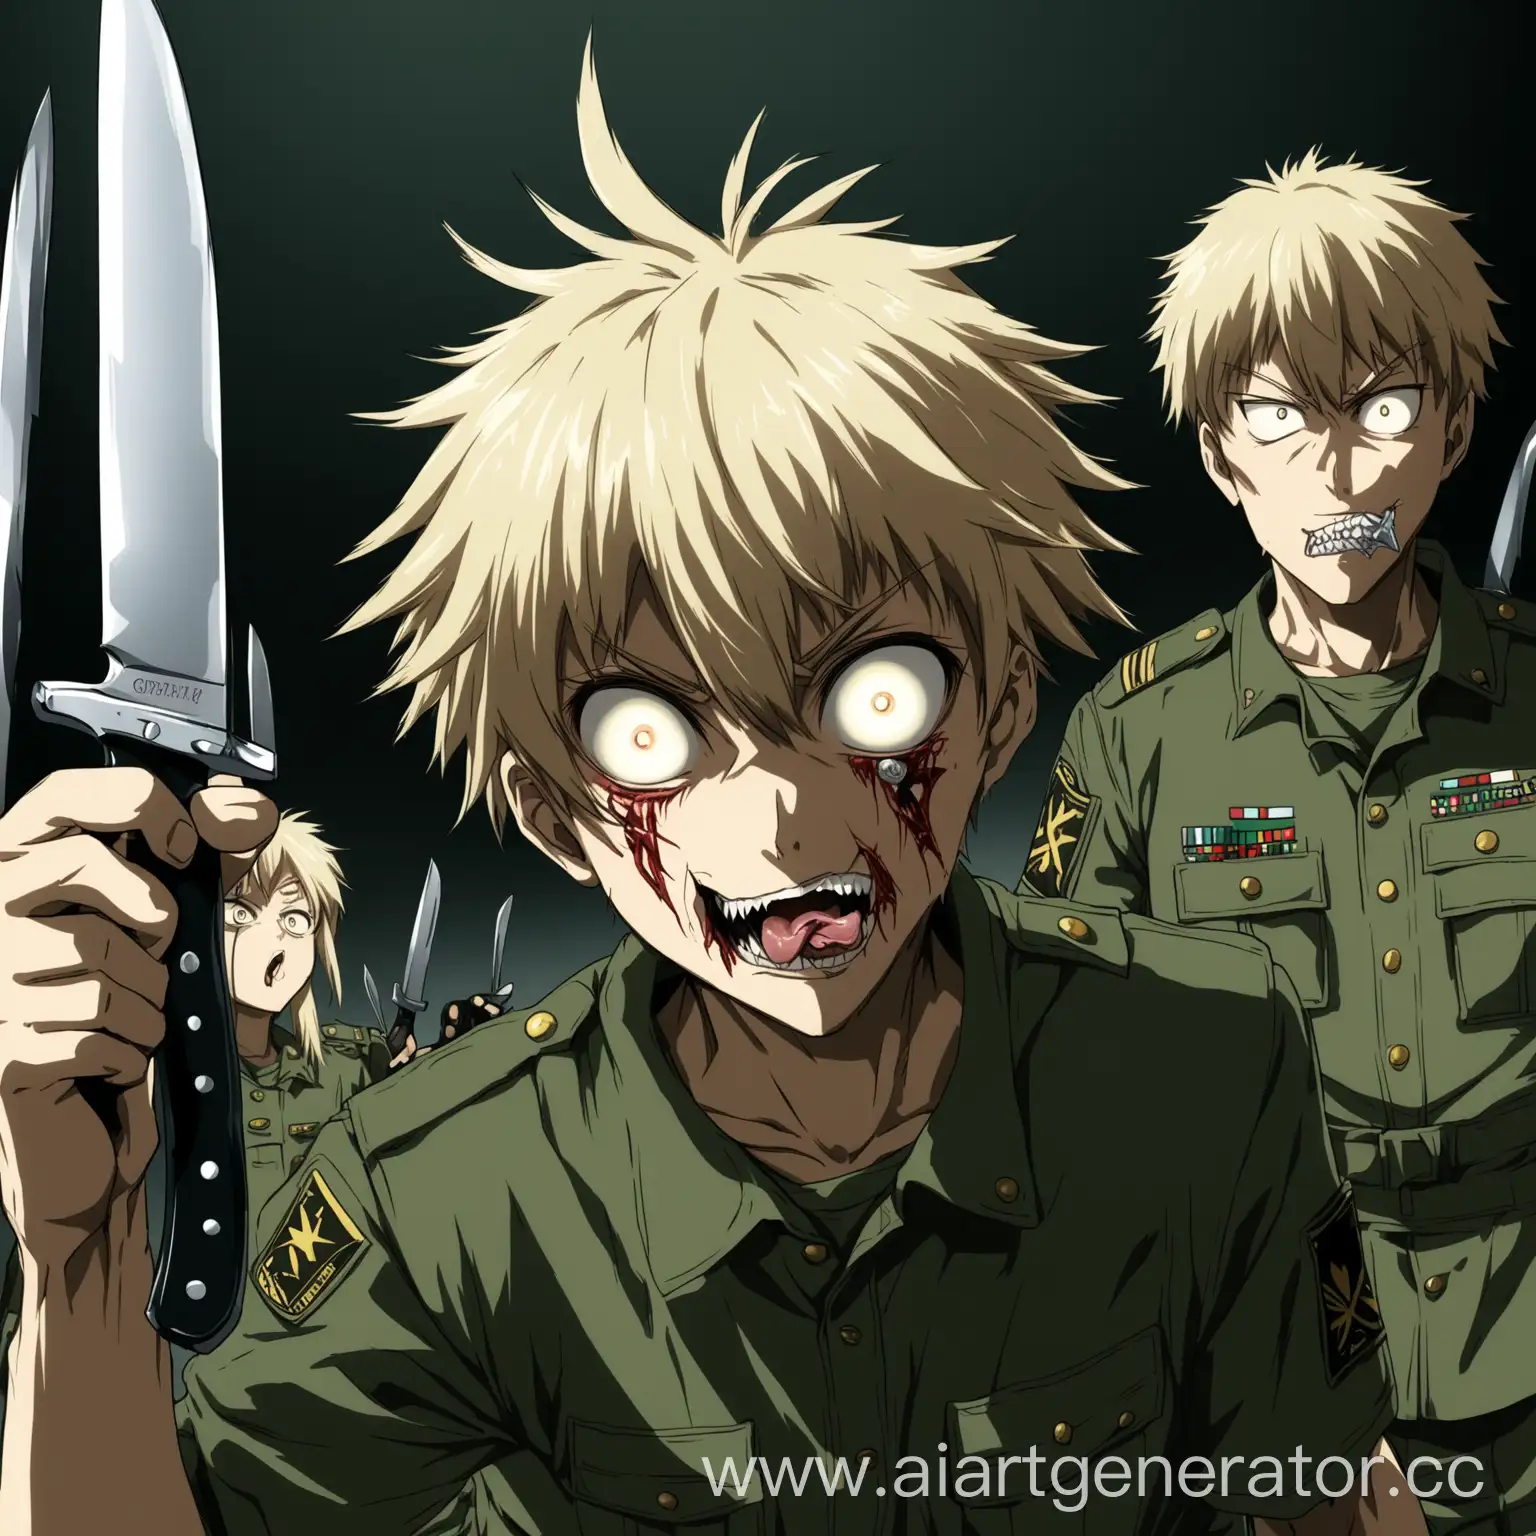 Eccentric-Anime-Character-with-Light-Hair-Licks-Army-Knife-Blade